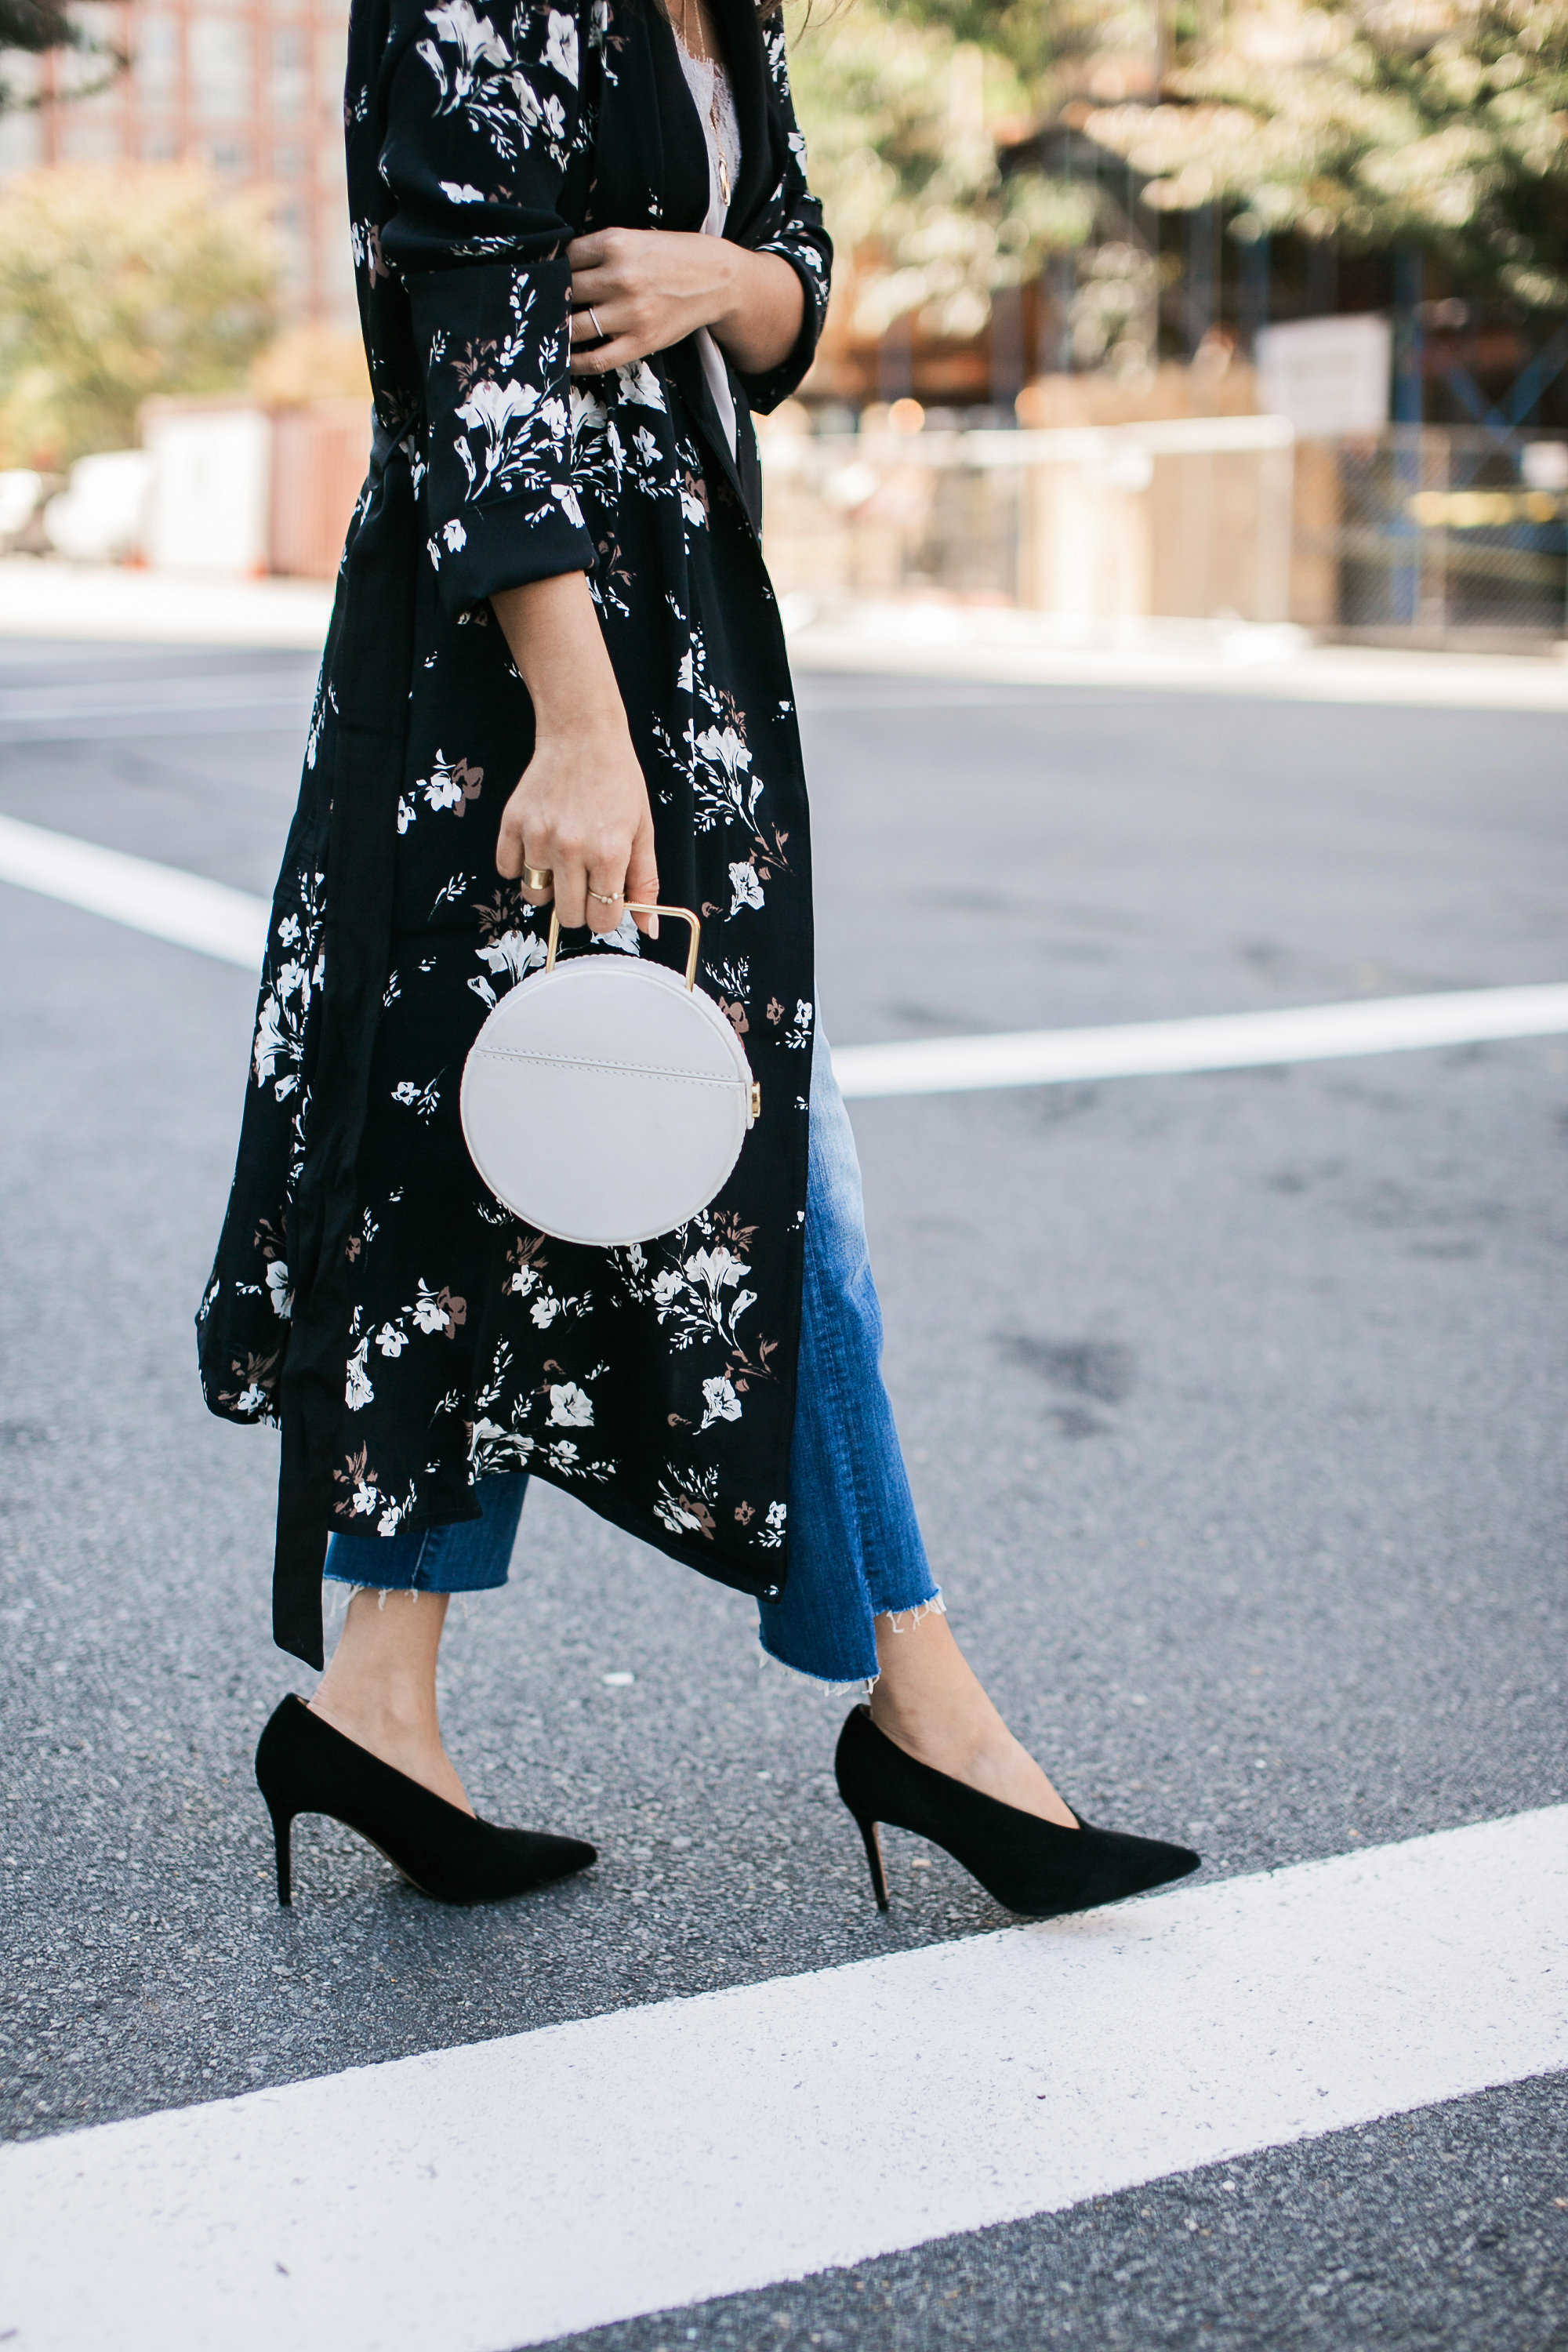 Style MBA Wears L'Academie x Revolve Floral Robe and Vince Pumps